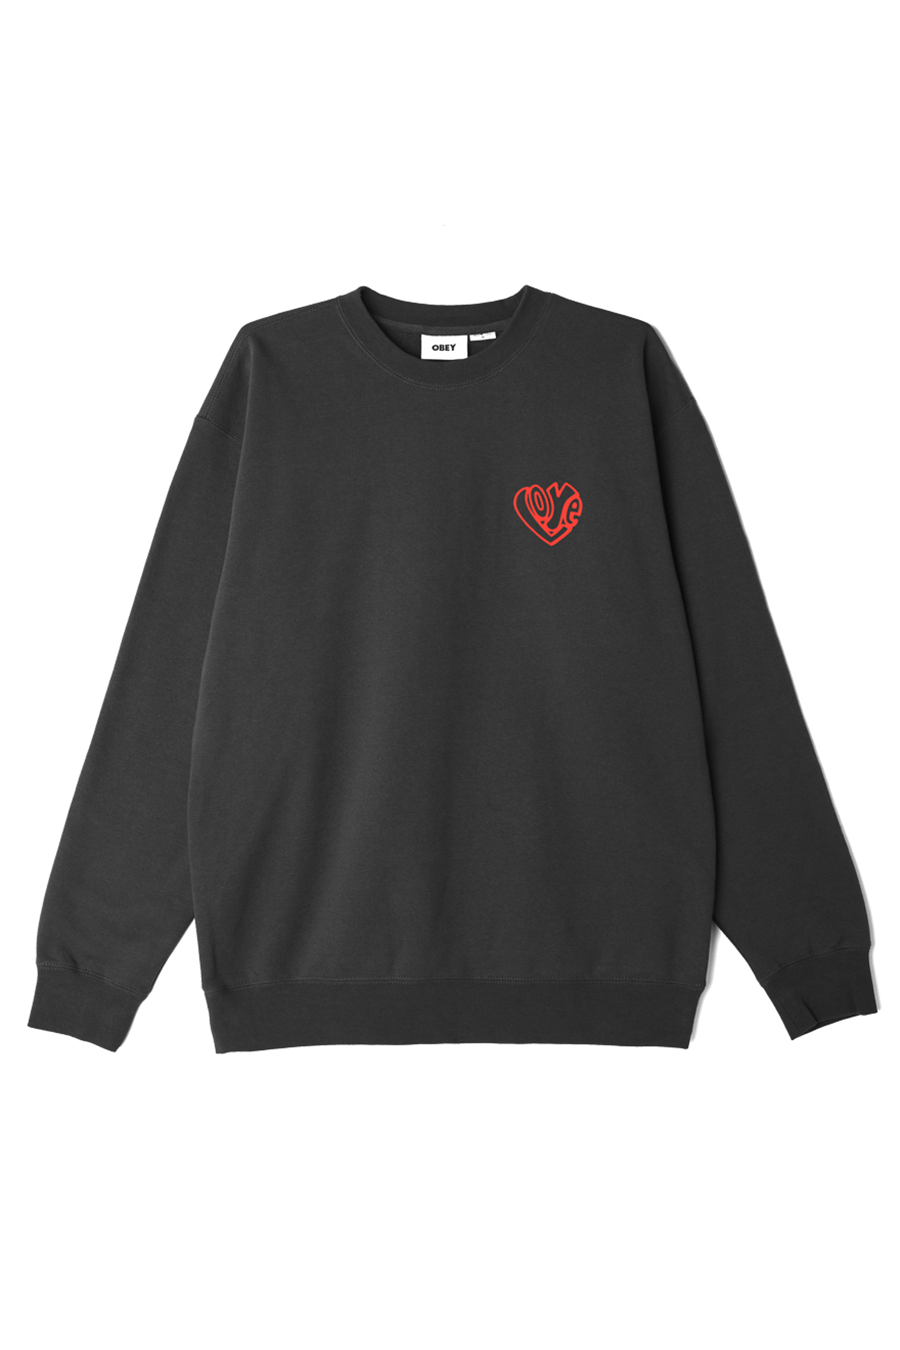 Free Your Feelings Crewneck | Black - Main Image Number 1 of 2